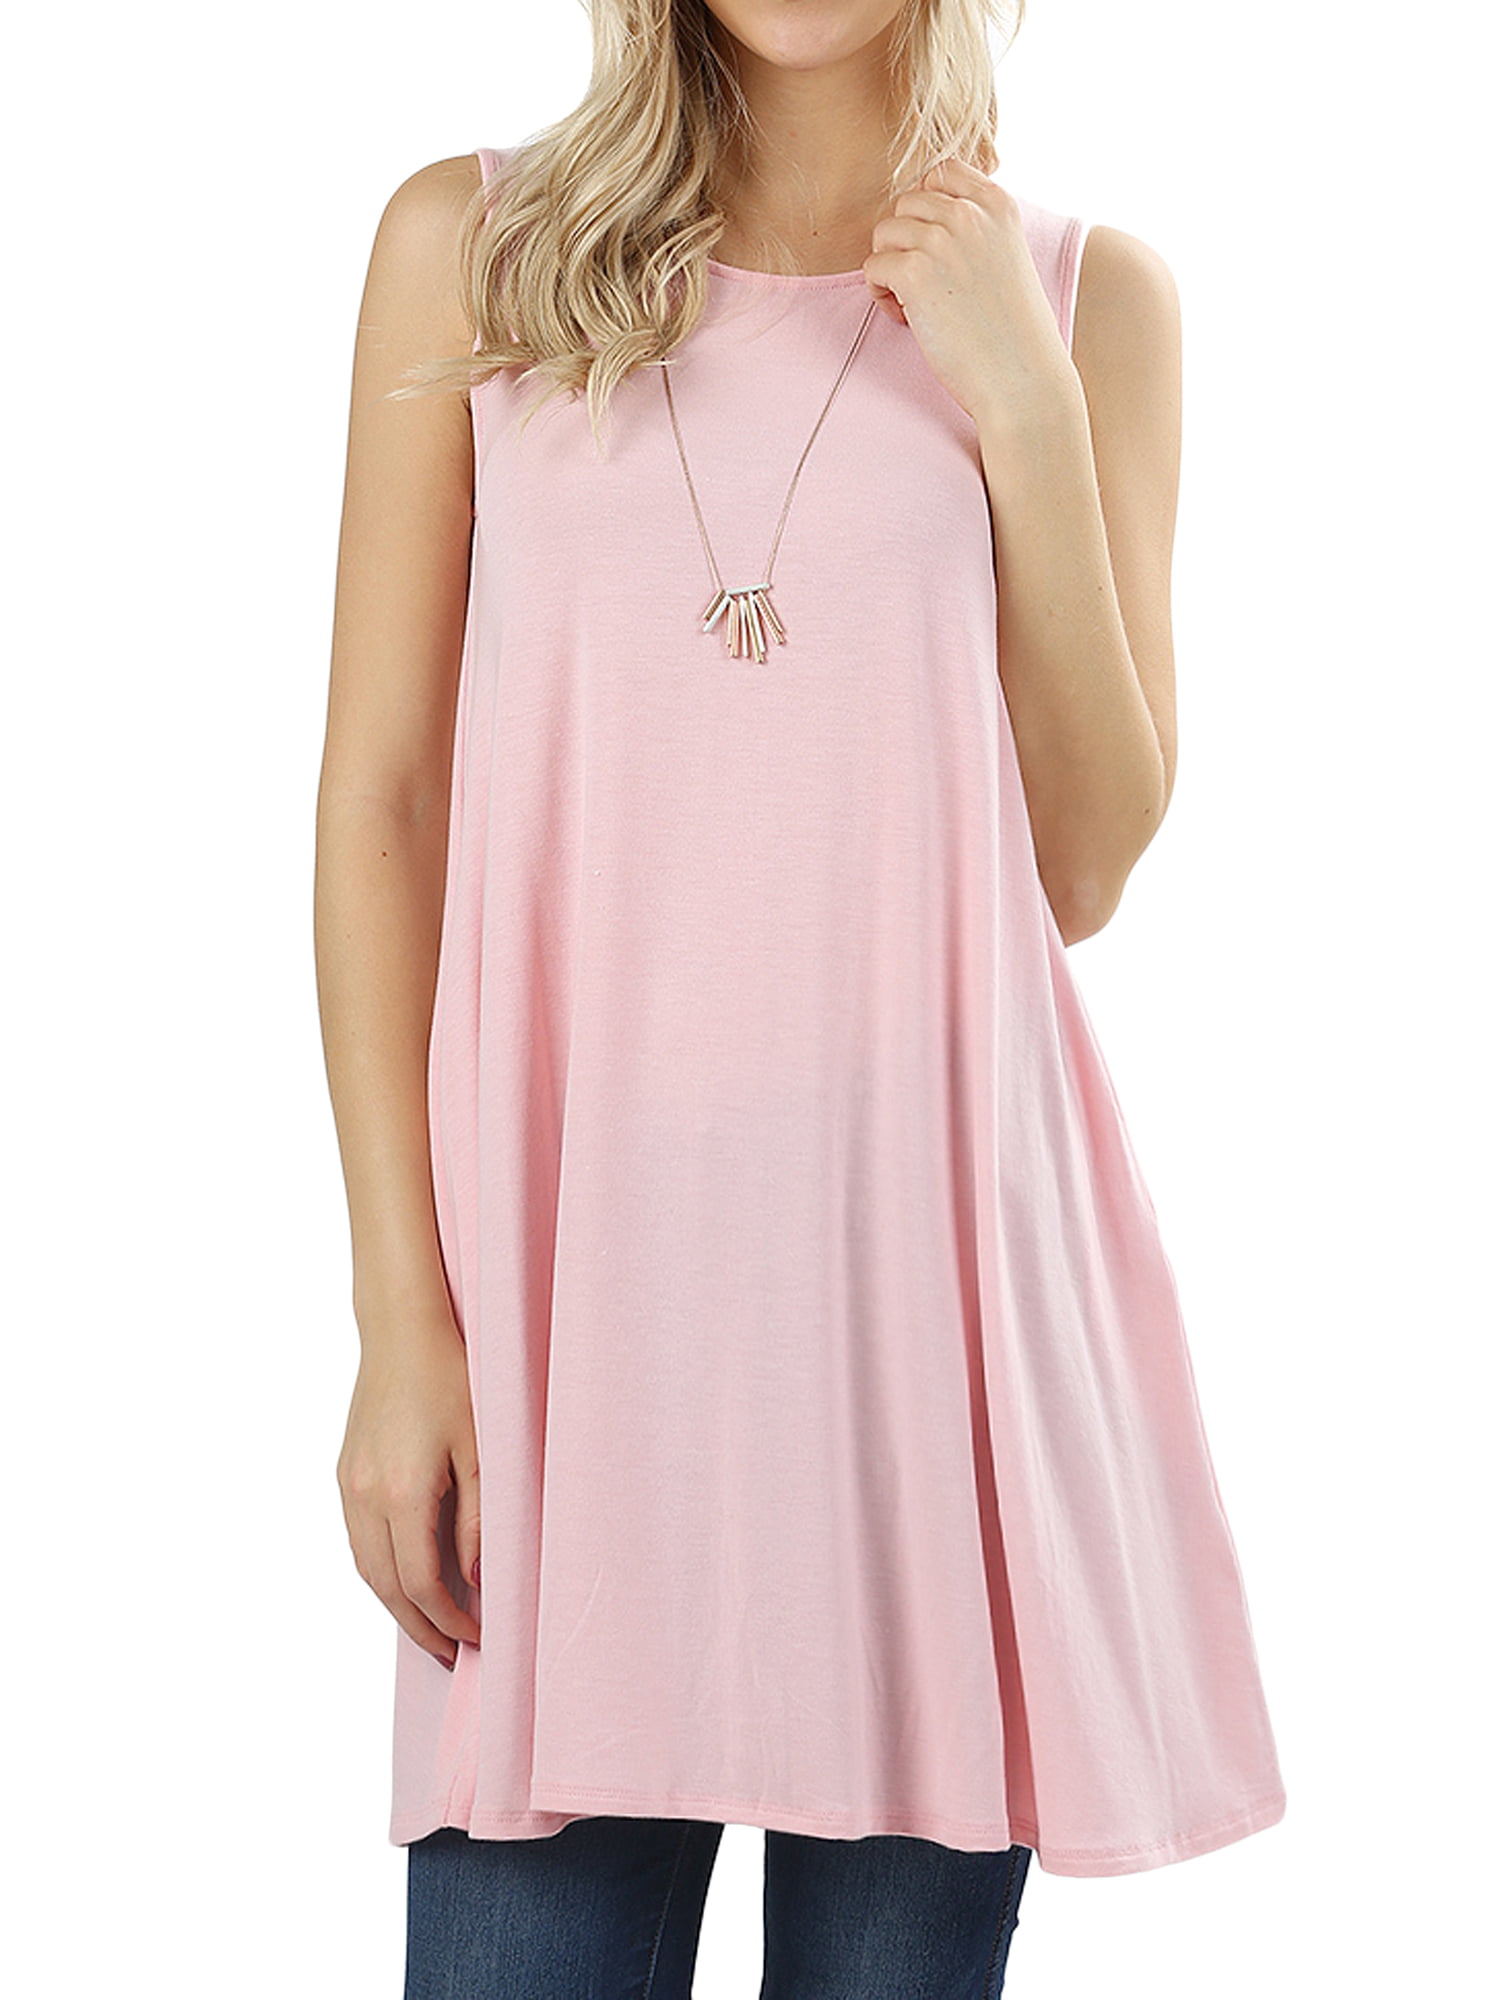 Women Round Neck Sleeveless Flowy Tunic Top with Side Pockets (Dusty ...